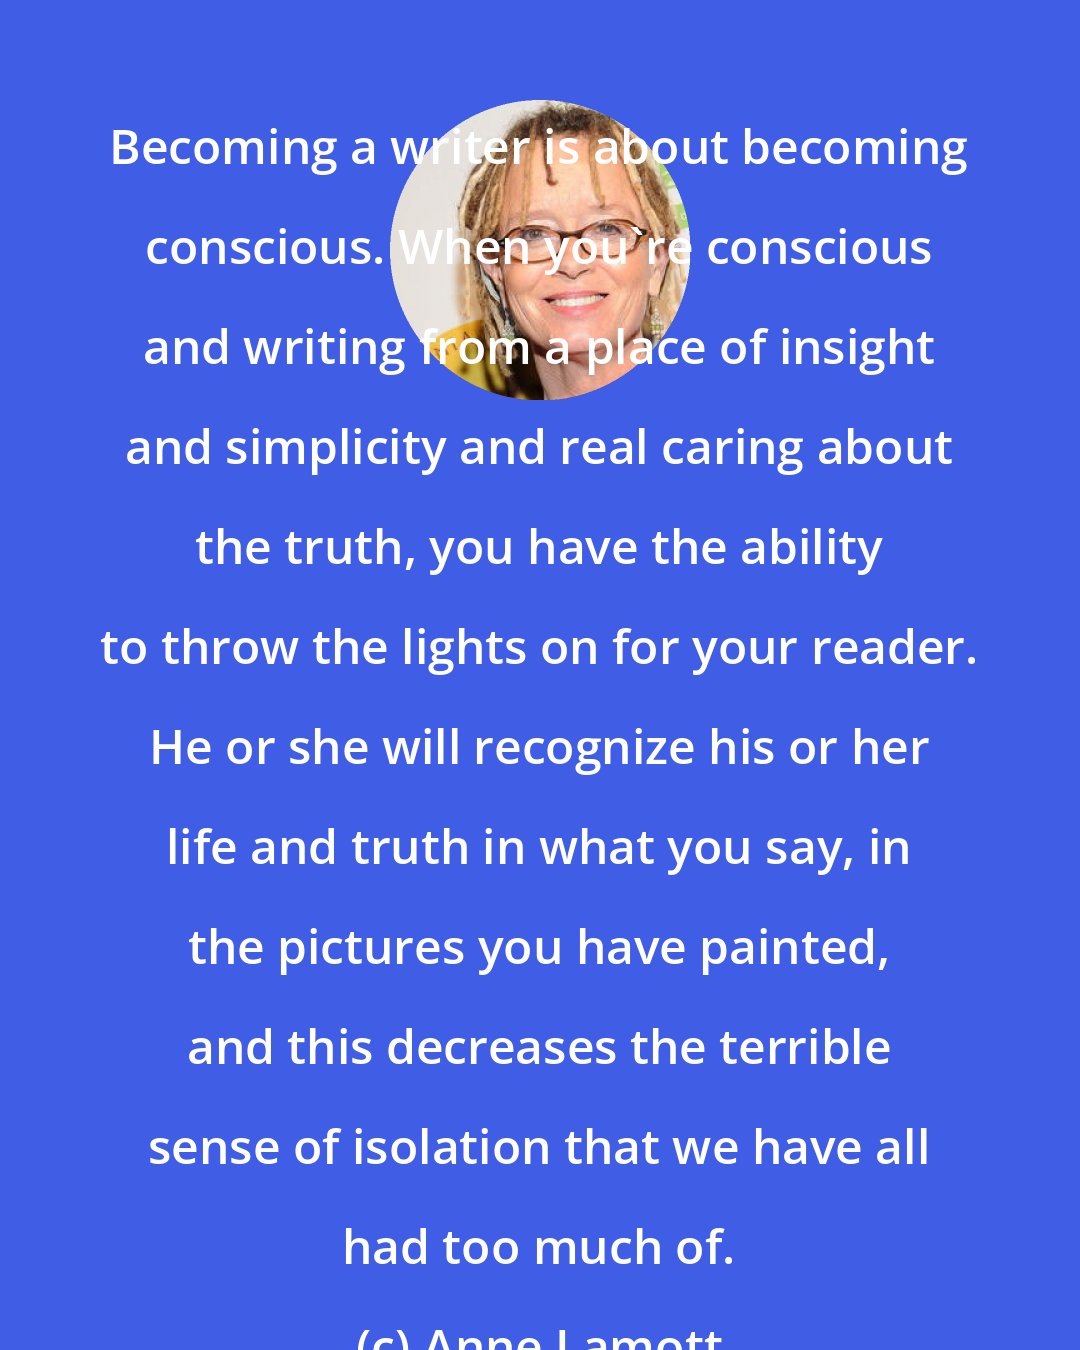 Anne Lamott: Becoming a writer is about becoming conscious. When you're conscious and writing from a place of insight and simplicity and real caring about the truth, you have the ability to throw the lights on for your reader. He or she will recognize his or her life and truth in what you say, in the pictures you have painted, and this decreases the terrible sense of isolation that we have all had too much of.